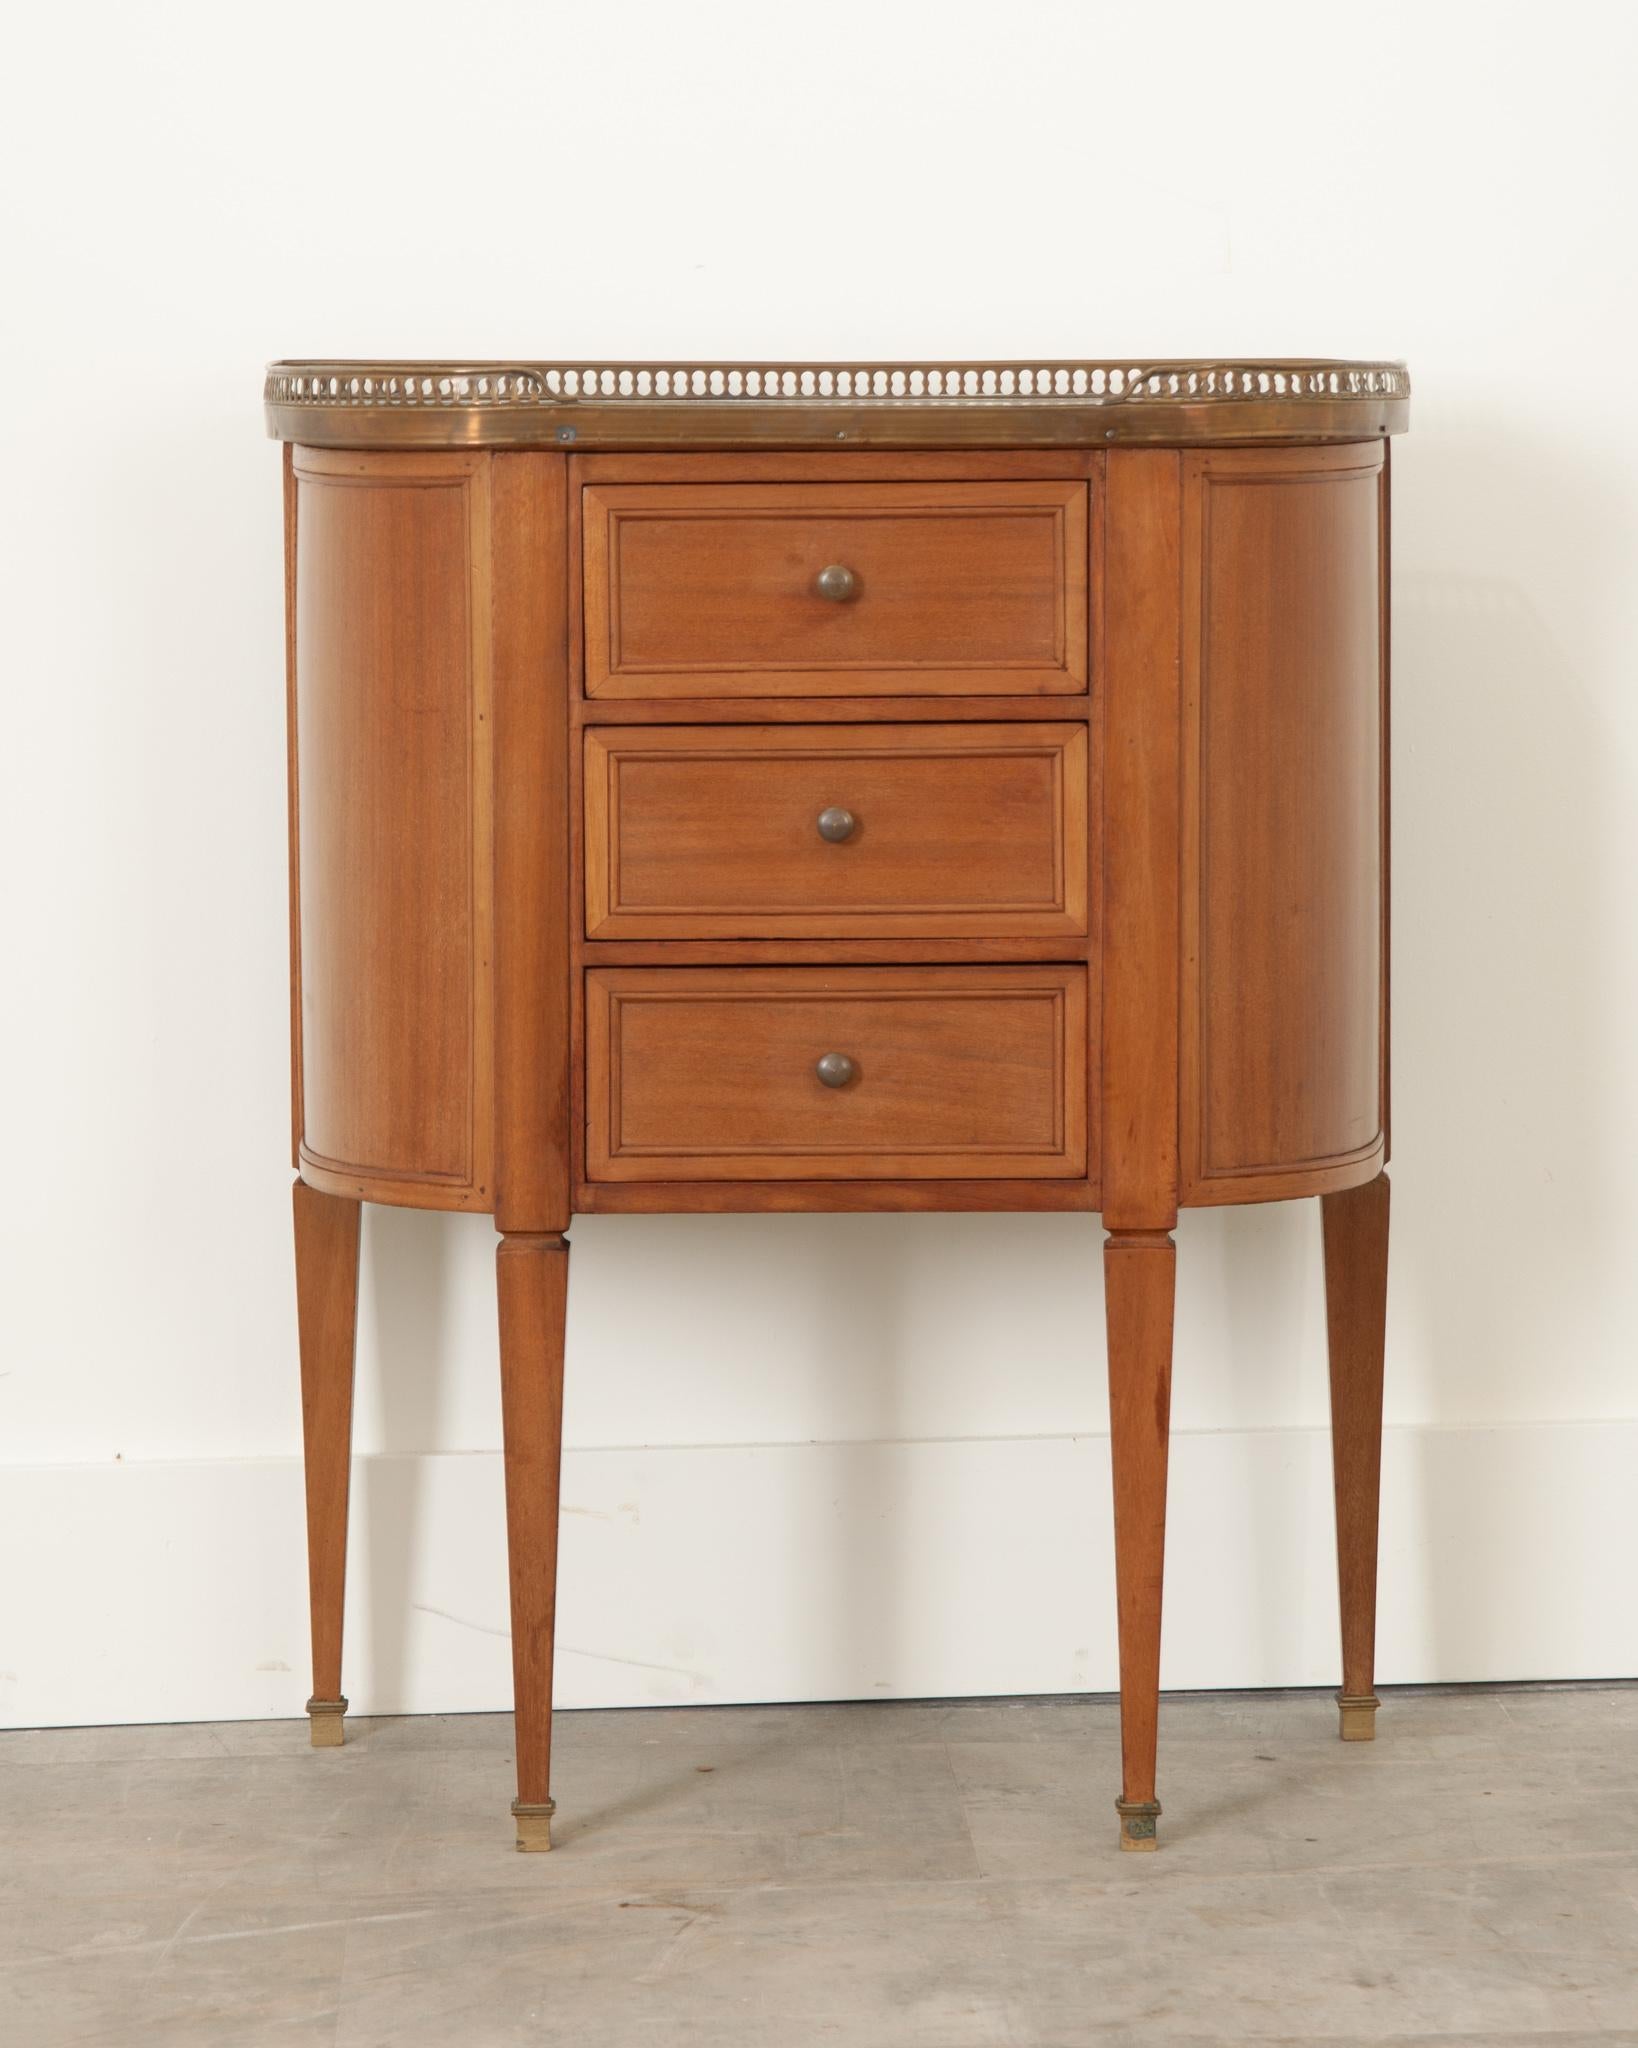 This petite mahogany bedside table was crafted in France during the 19th century. A breakfront pierced brass gallery surrounds the antique white marble top. The marble is in excellent condition. Three drawers with thumbnail molding are fixed with